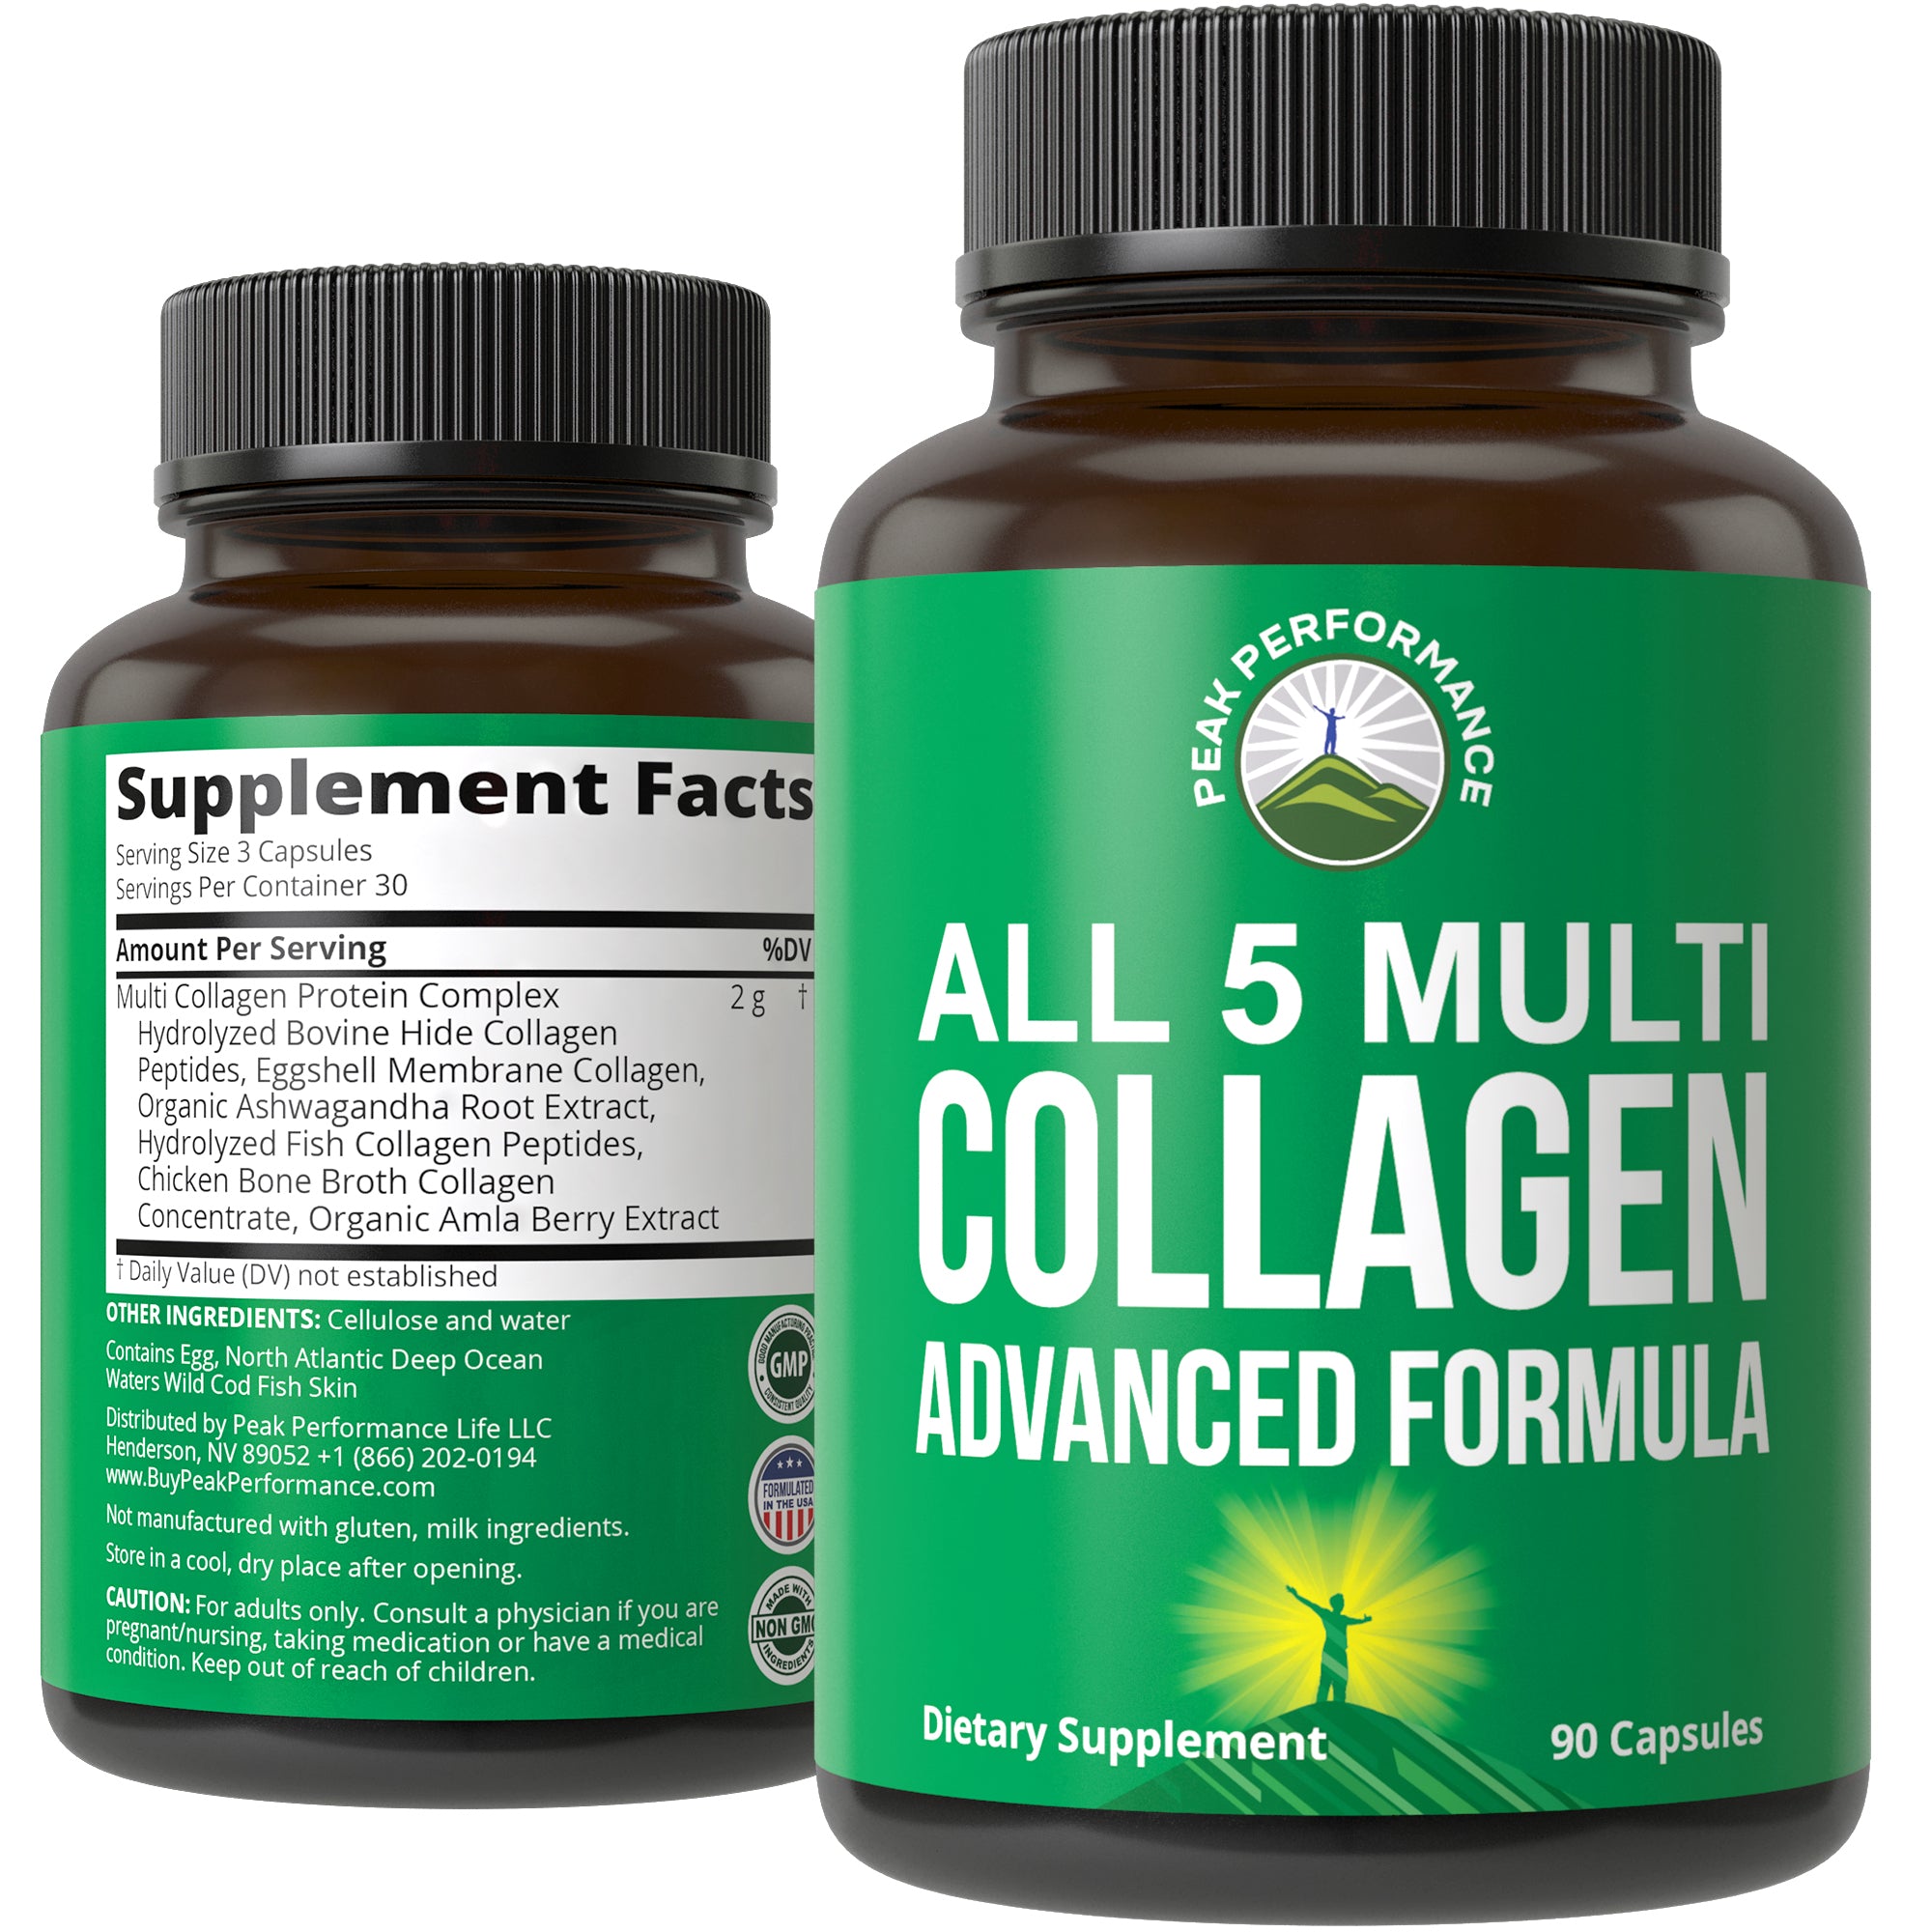 ALL 5 MULTI Collagen Capsules With All 5 Collagen Types I, II, III,V, X